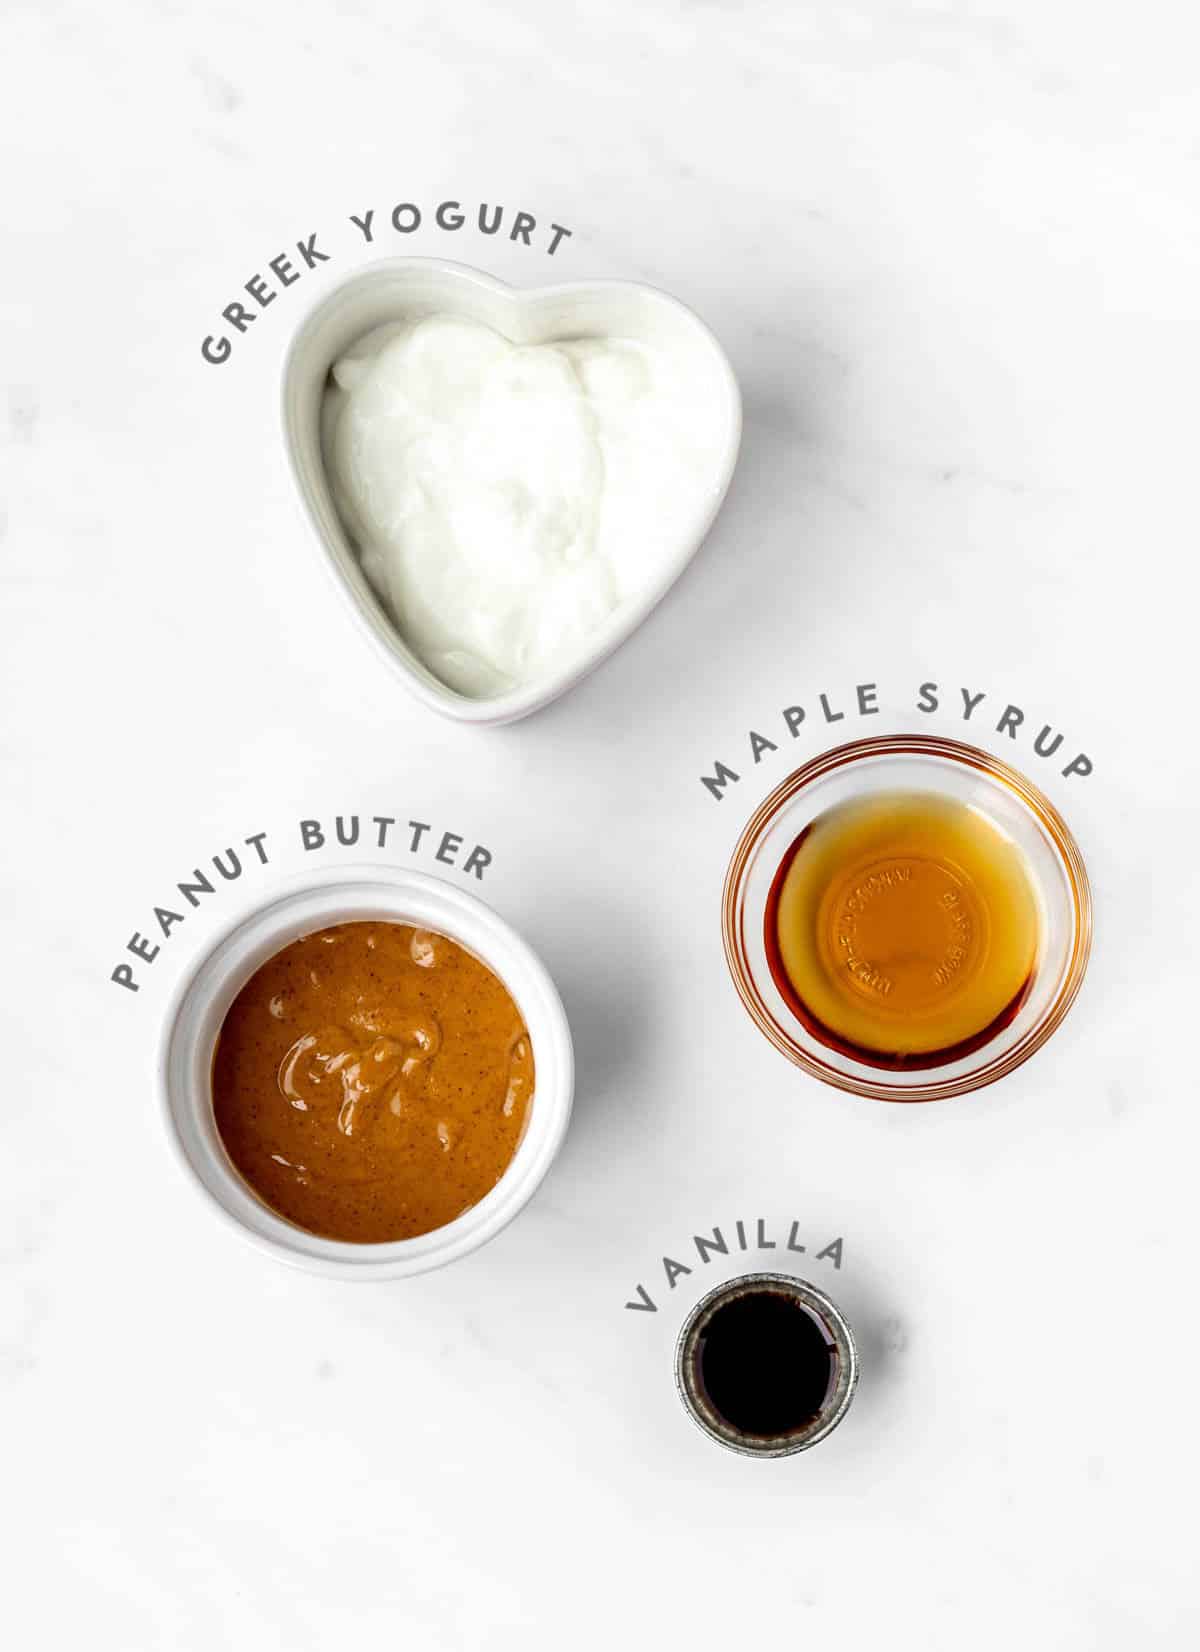 Ingredients required for 4-ingredient peanut butter dip.